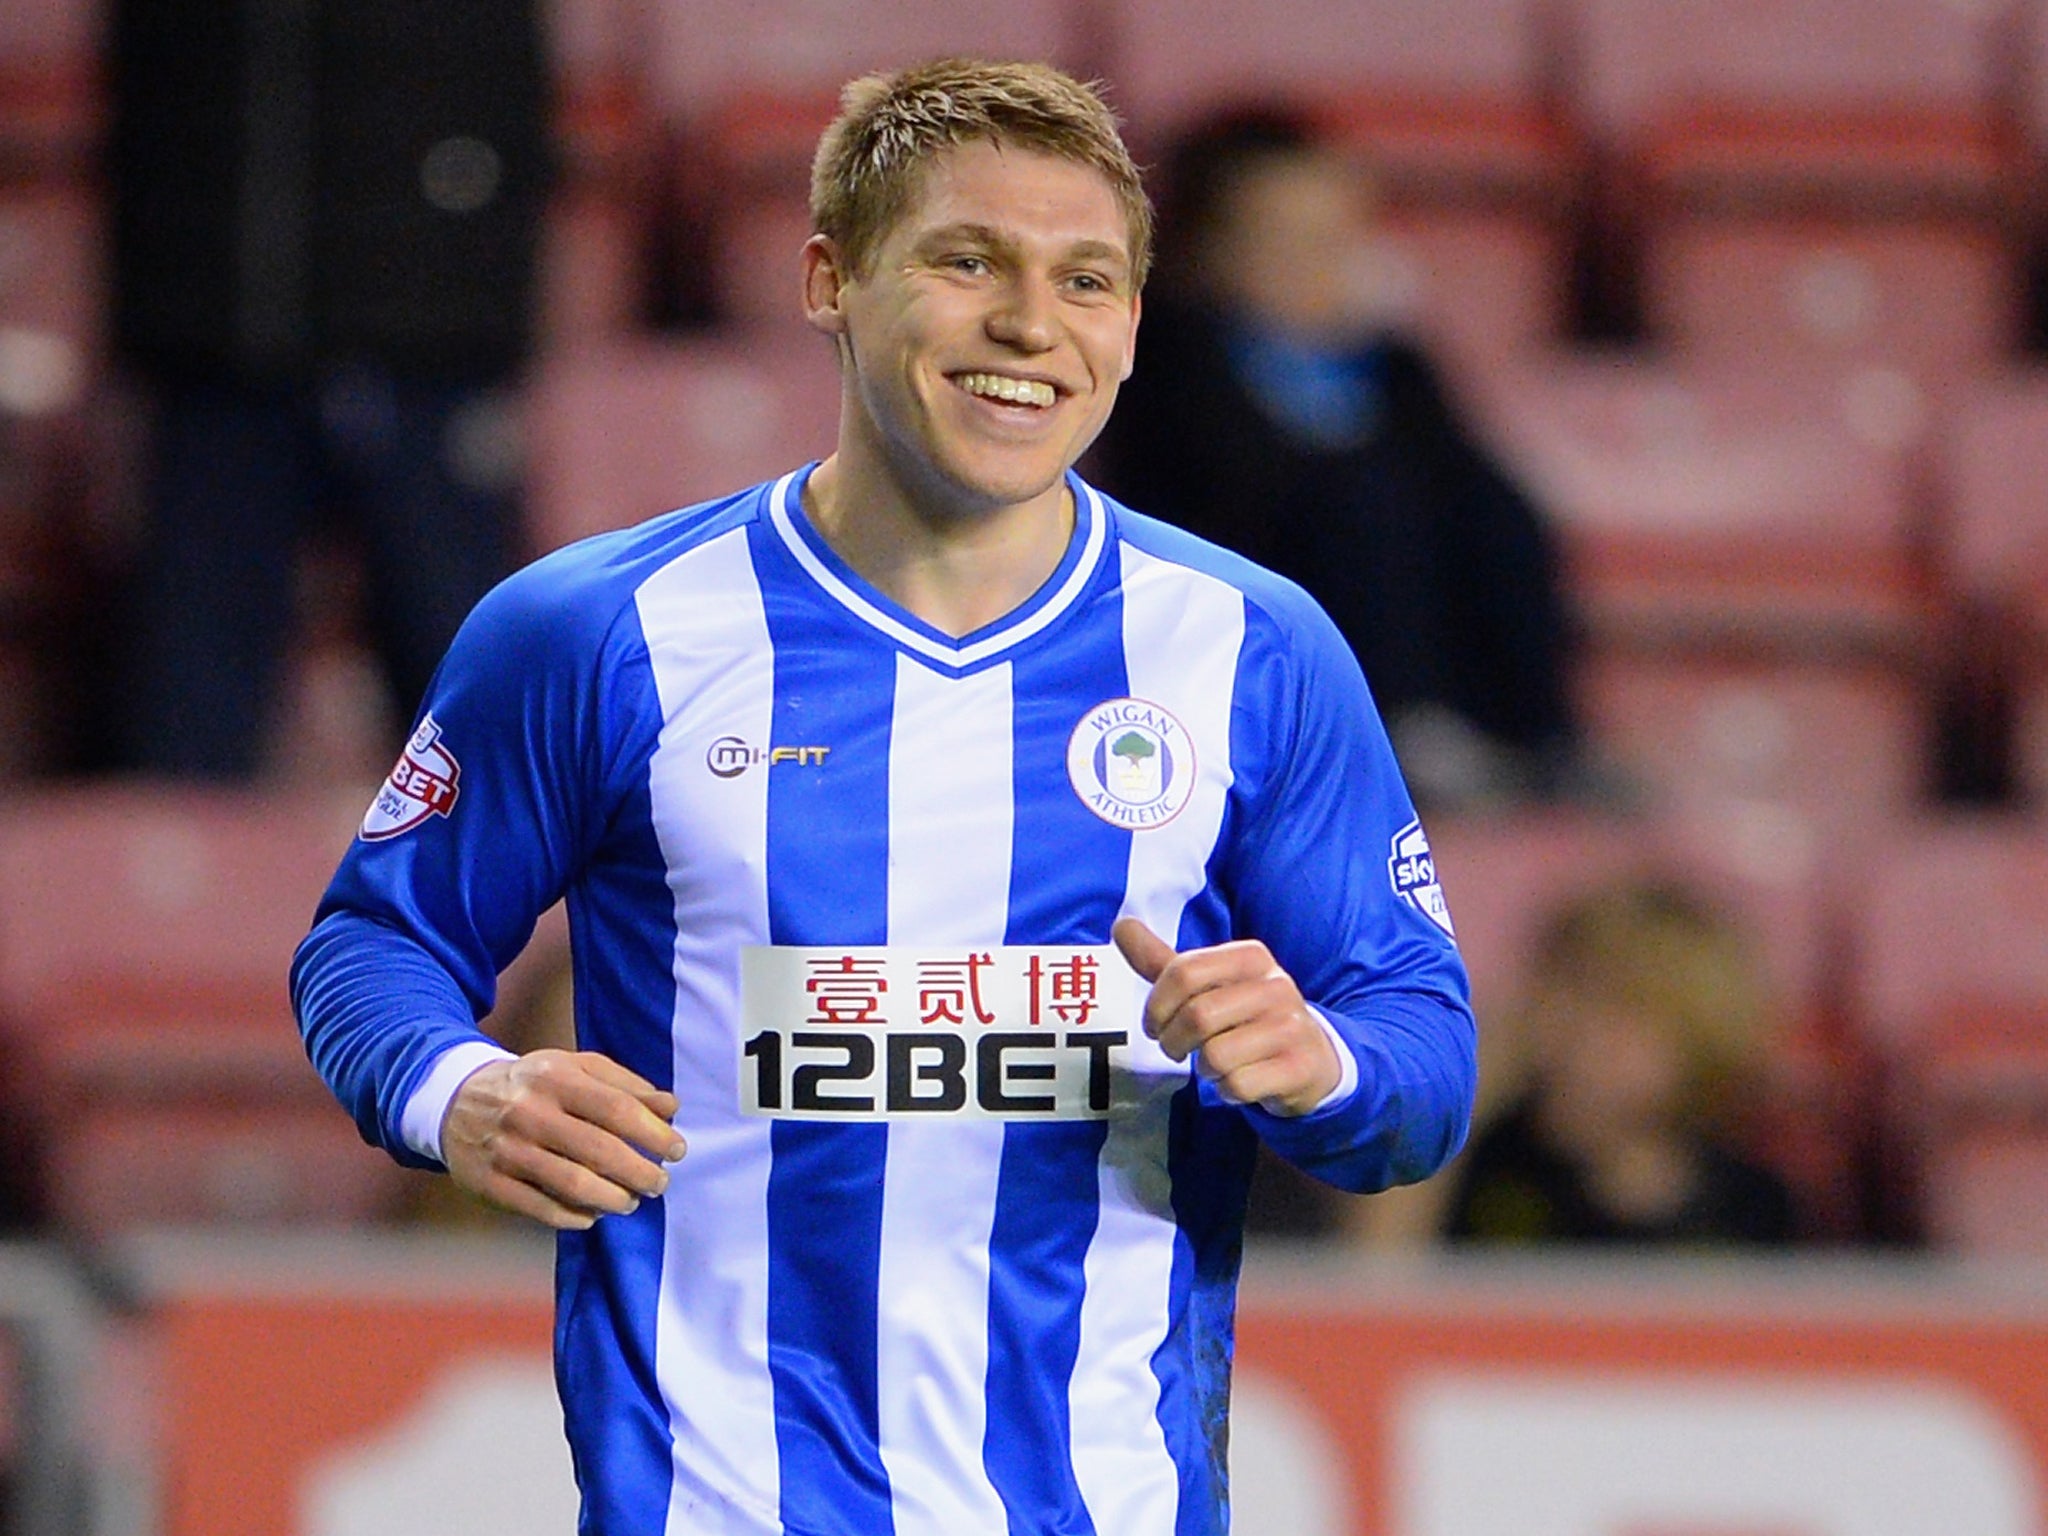 Martyn Waghorn celebrated his permanent move to Wigan with the winning goal against Leeds